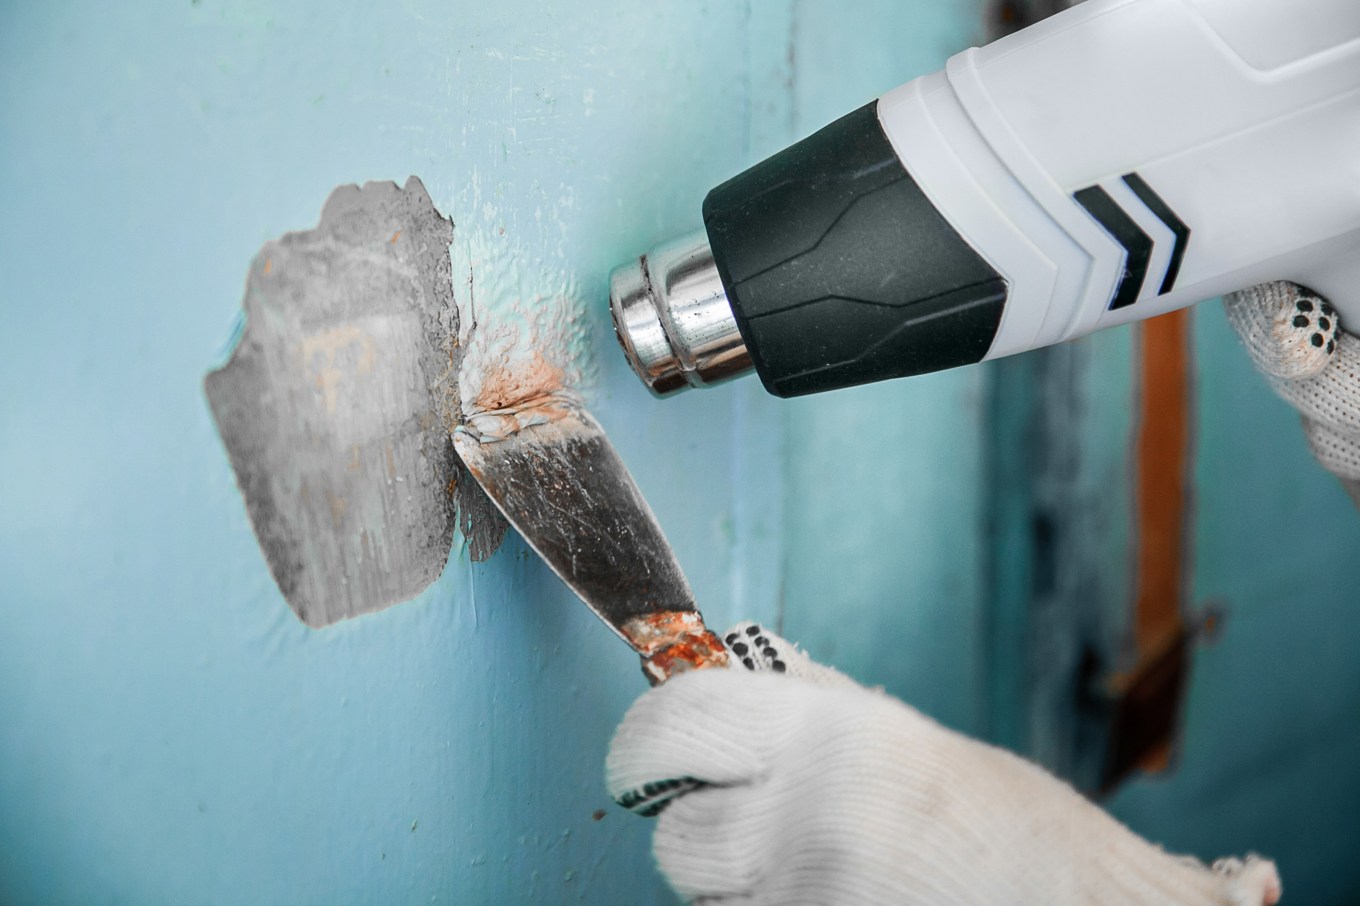 Removing paint from a concrete wall with a scraper and a heat gun.